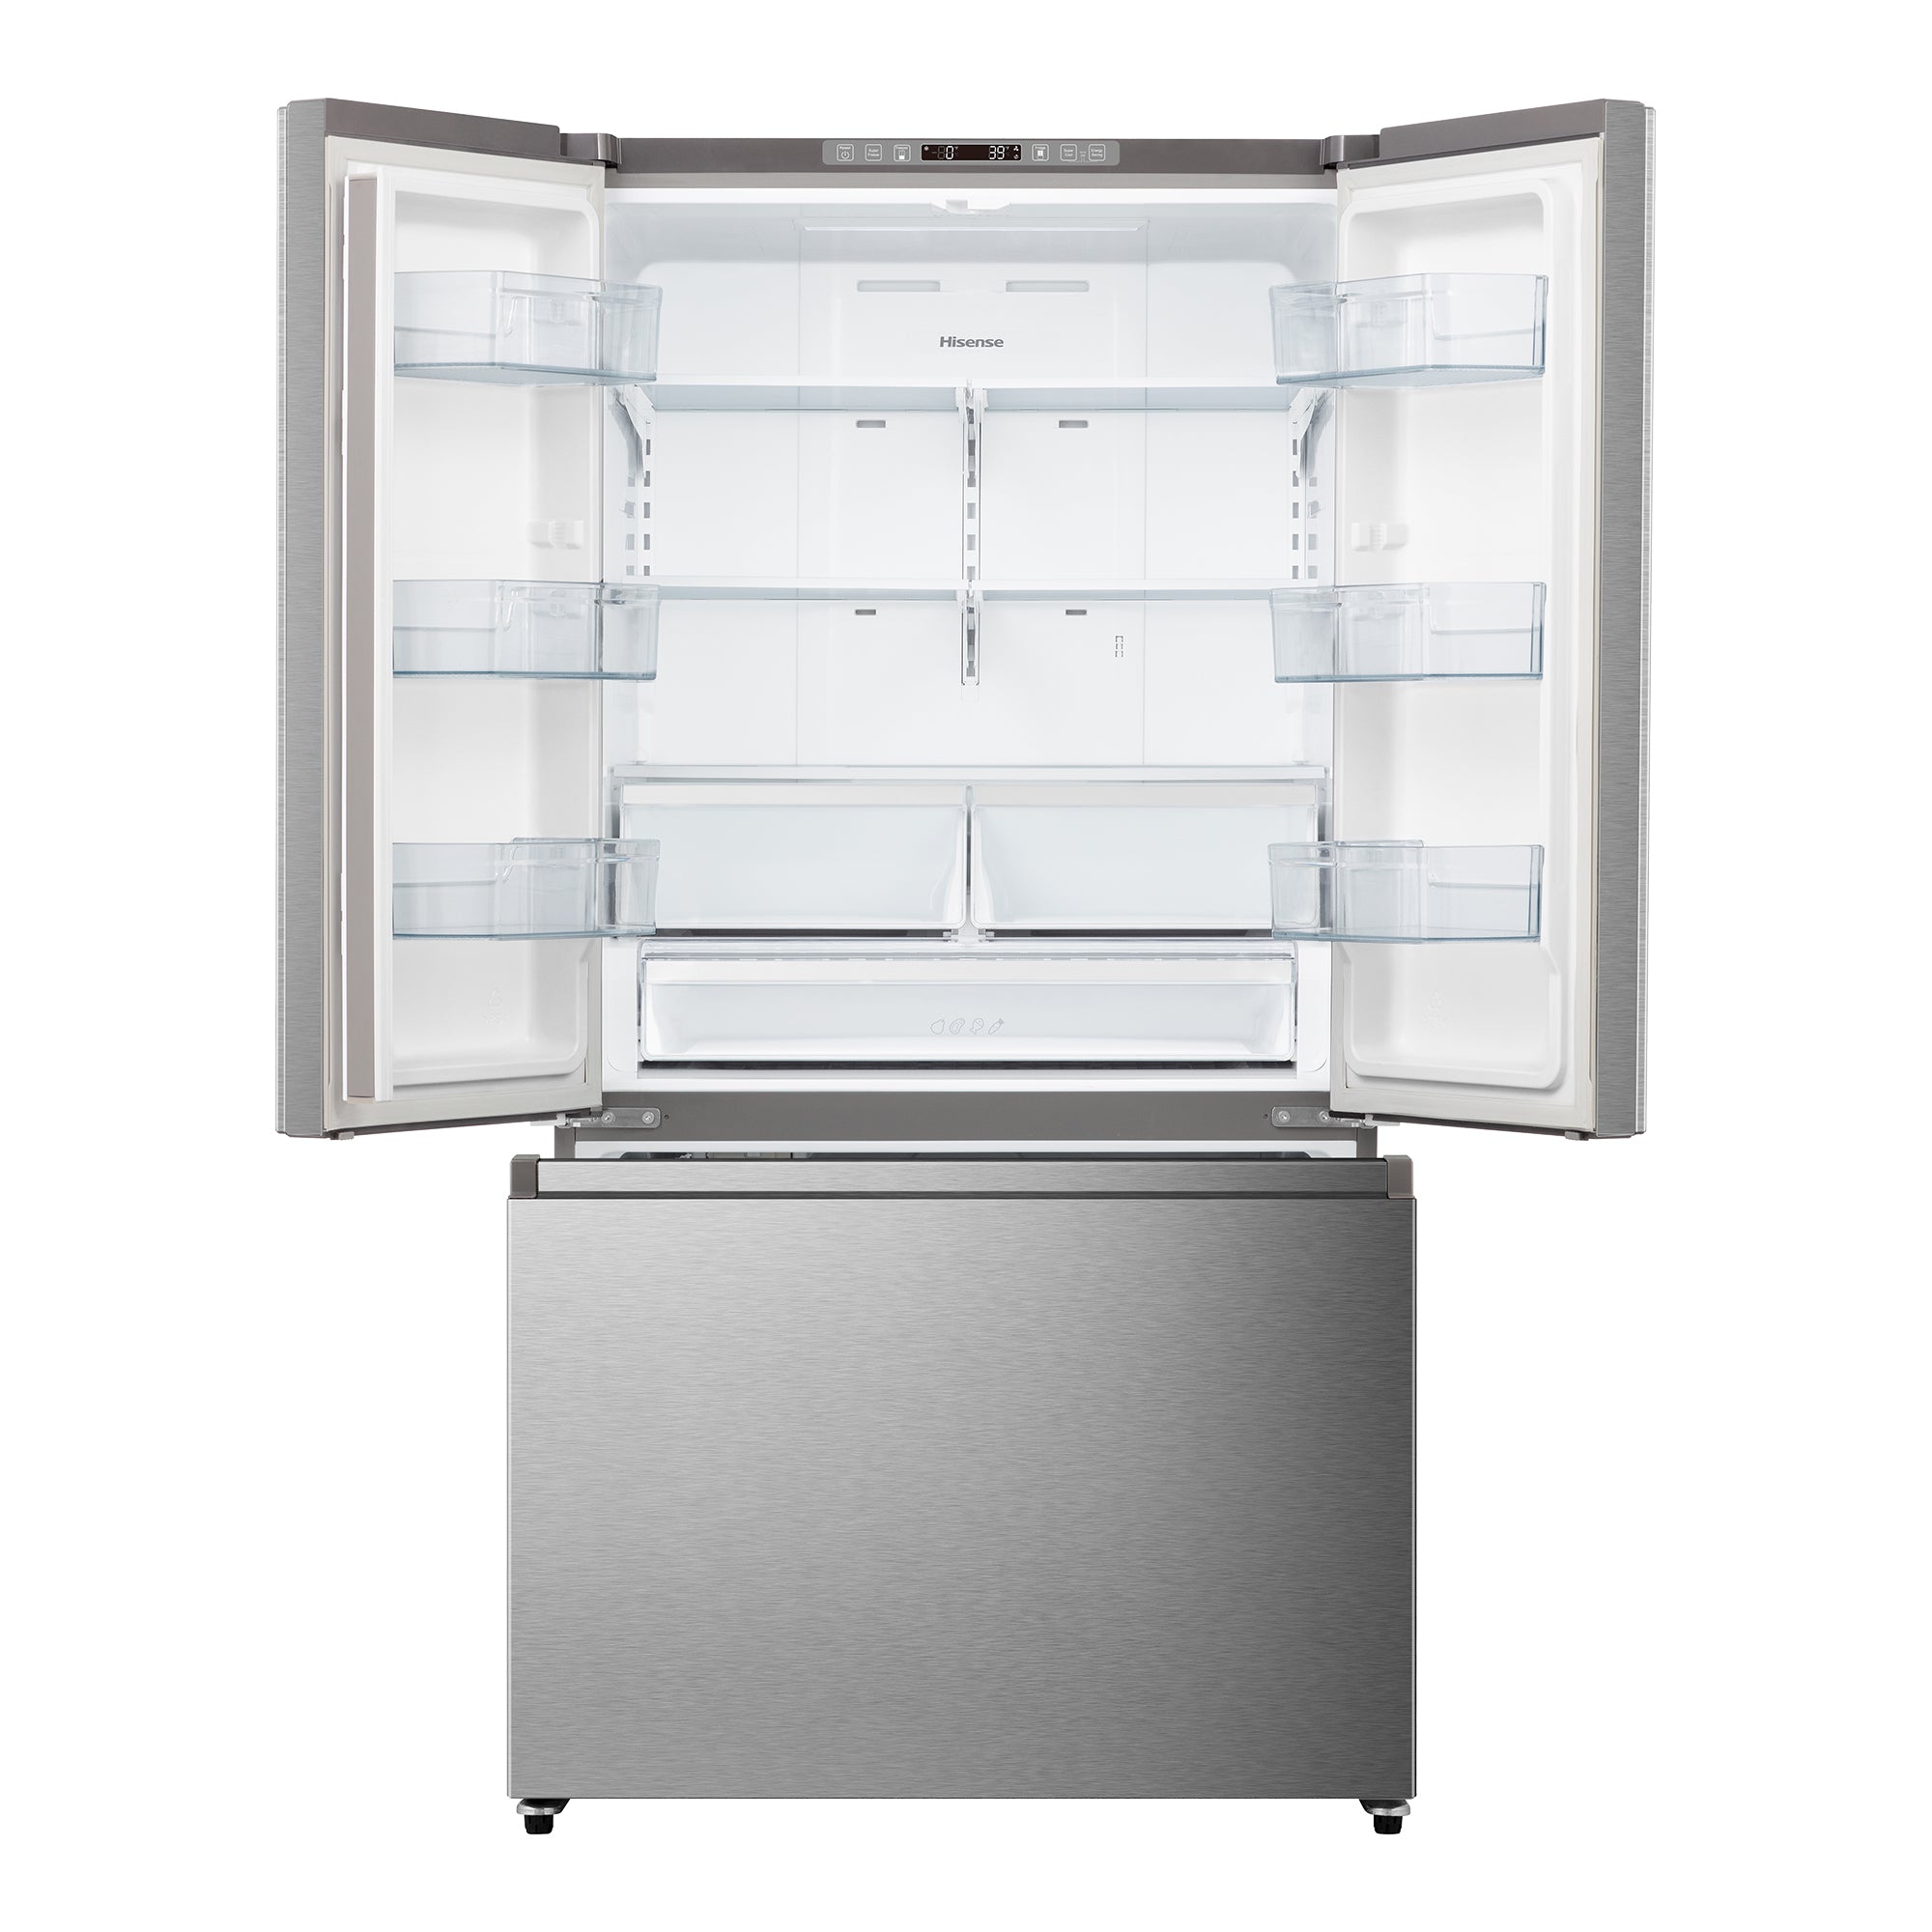 Hisense - 35.98 Inch 26.6 cu. ft French Door Refrigerator in Stainless - RF27A3FSE